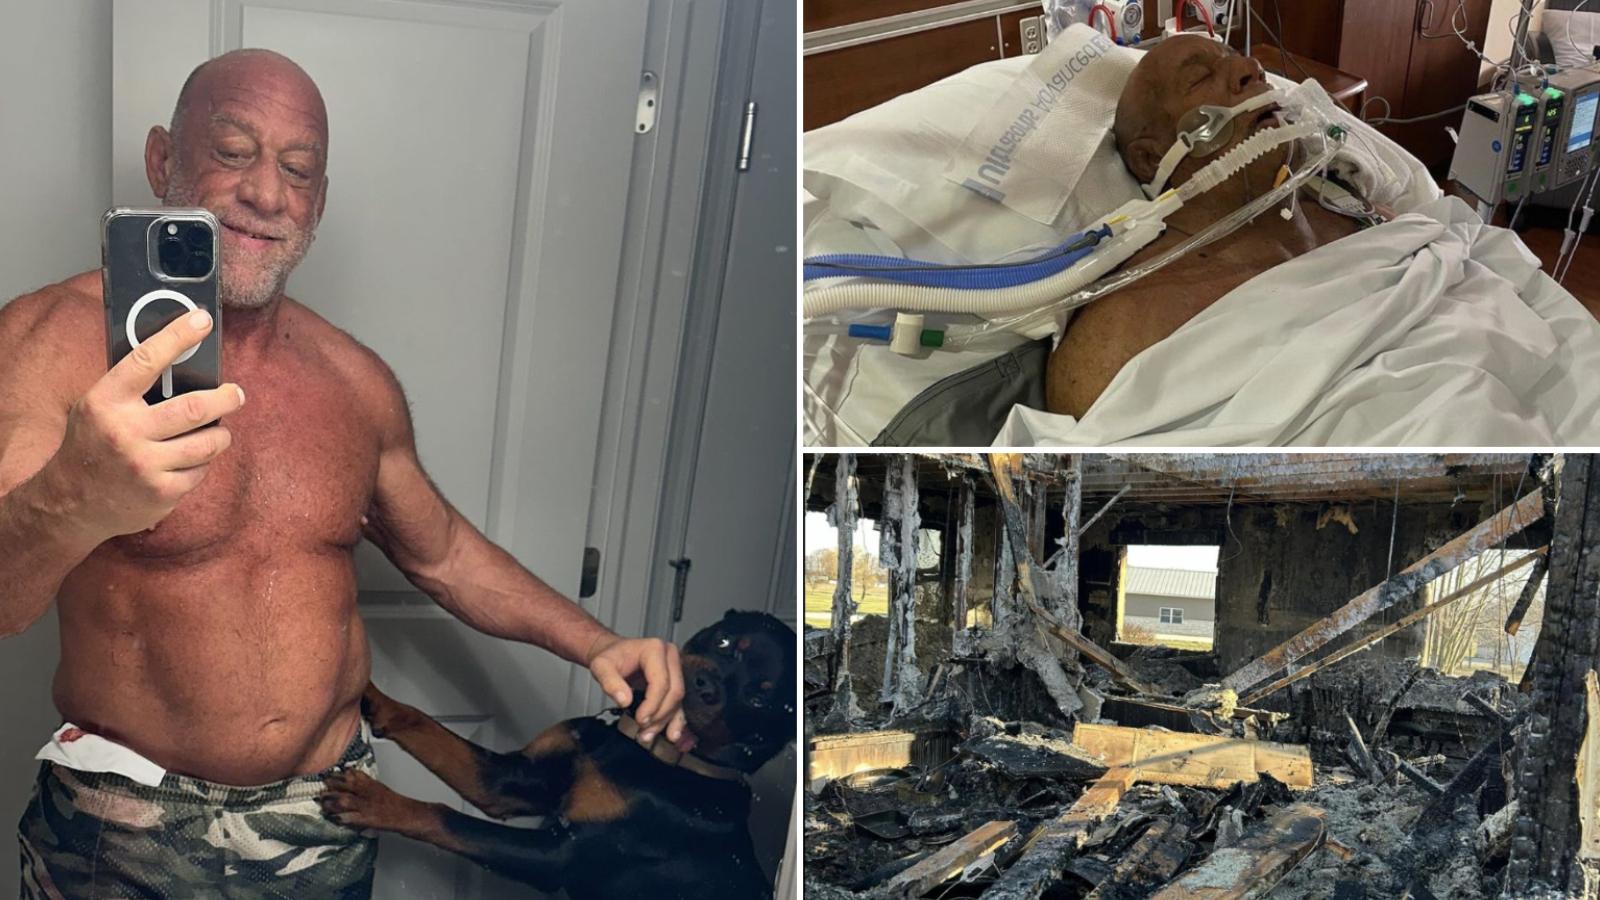 ufc fighter mark coleman with dog, in hospital and parents home burned down